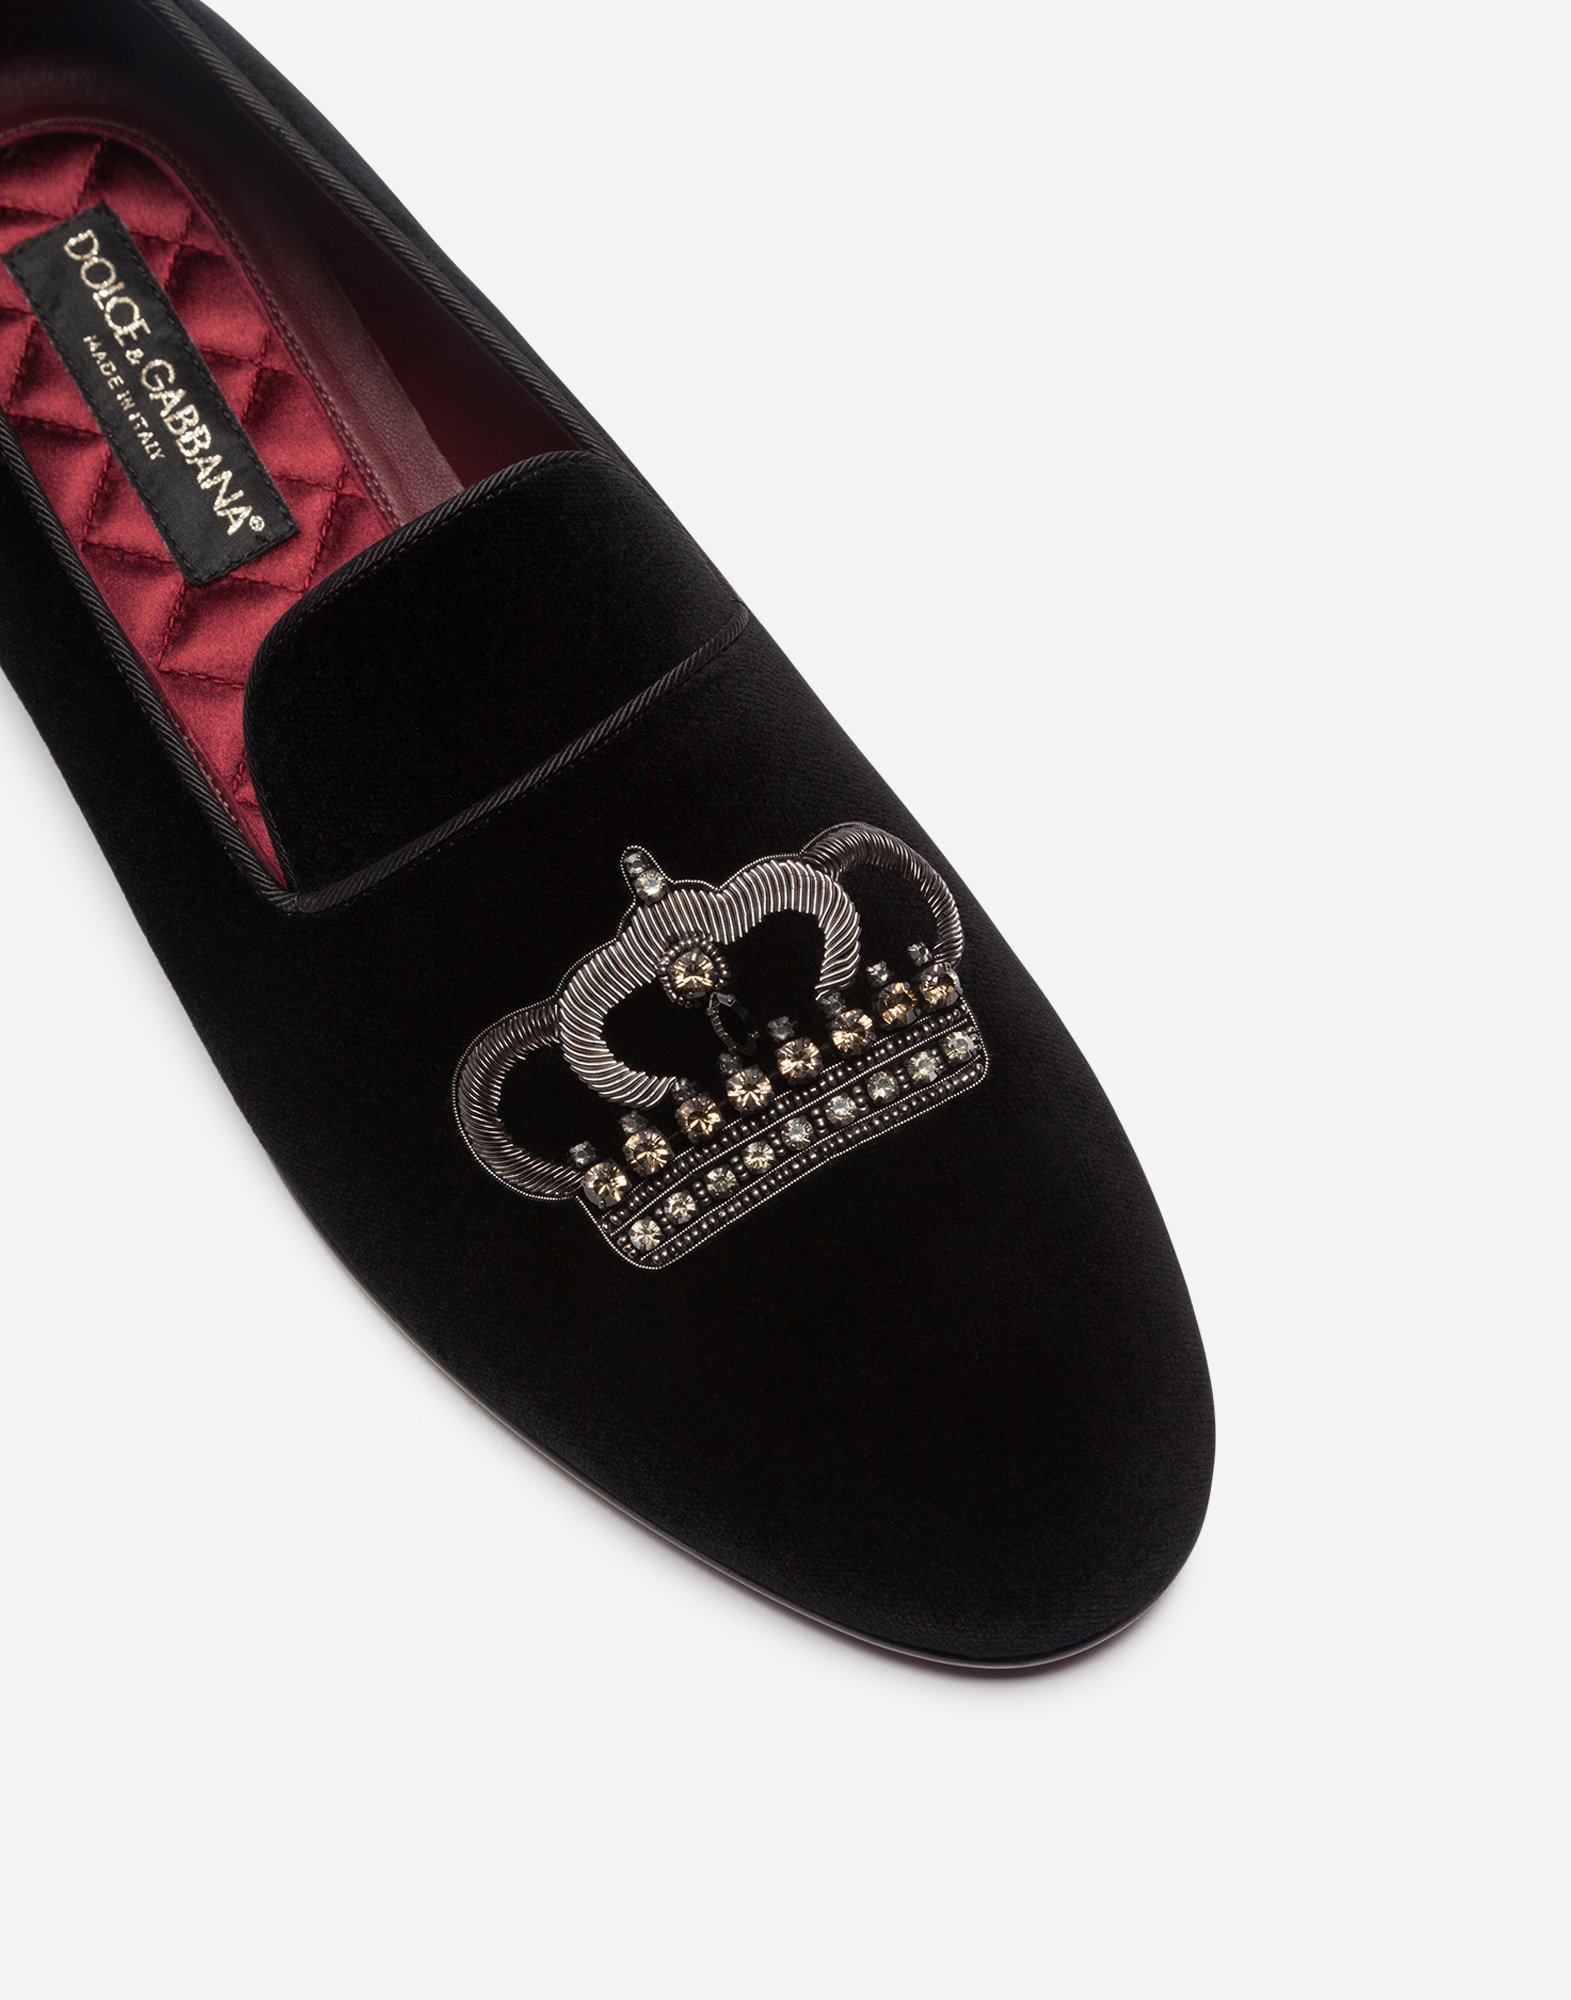 dolce and gabbana mens slippers